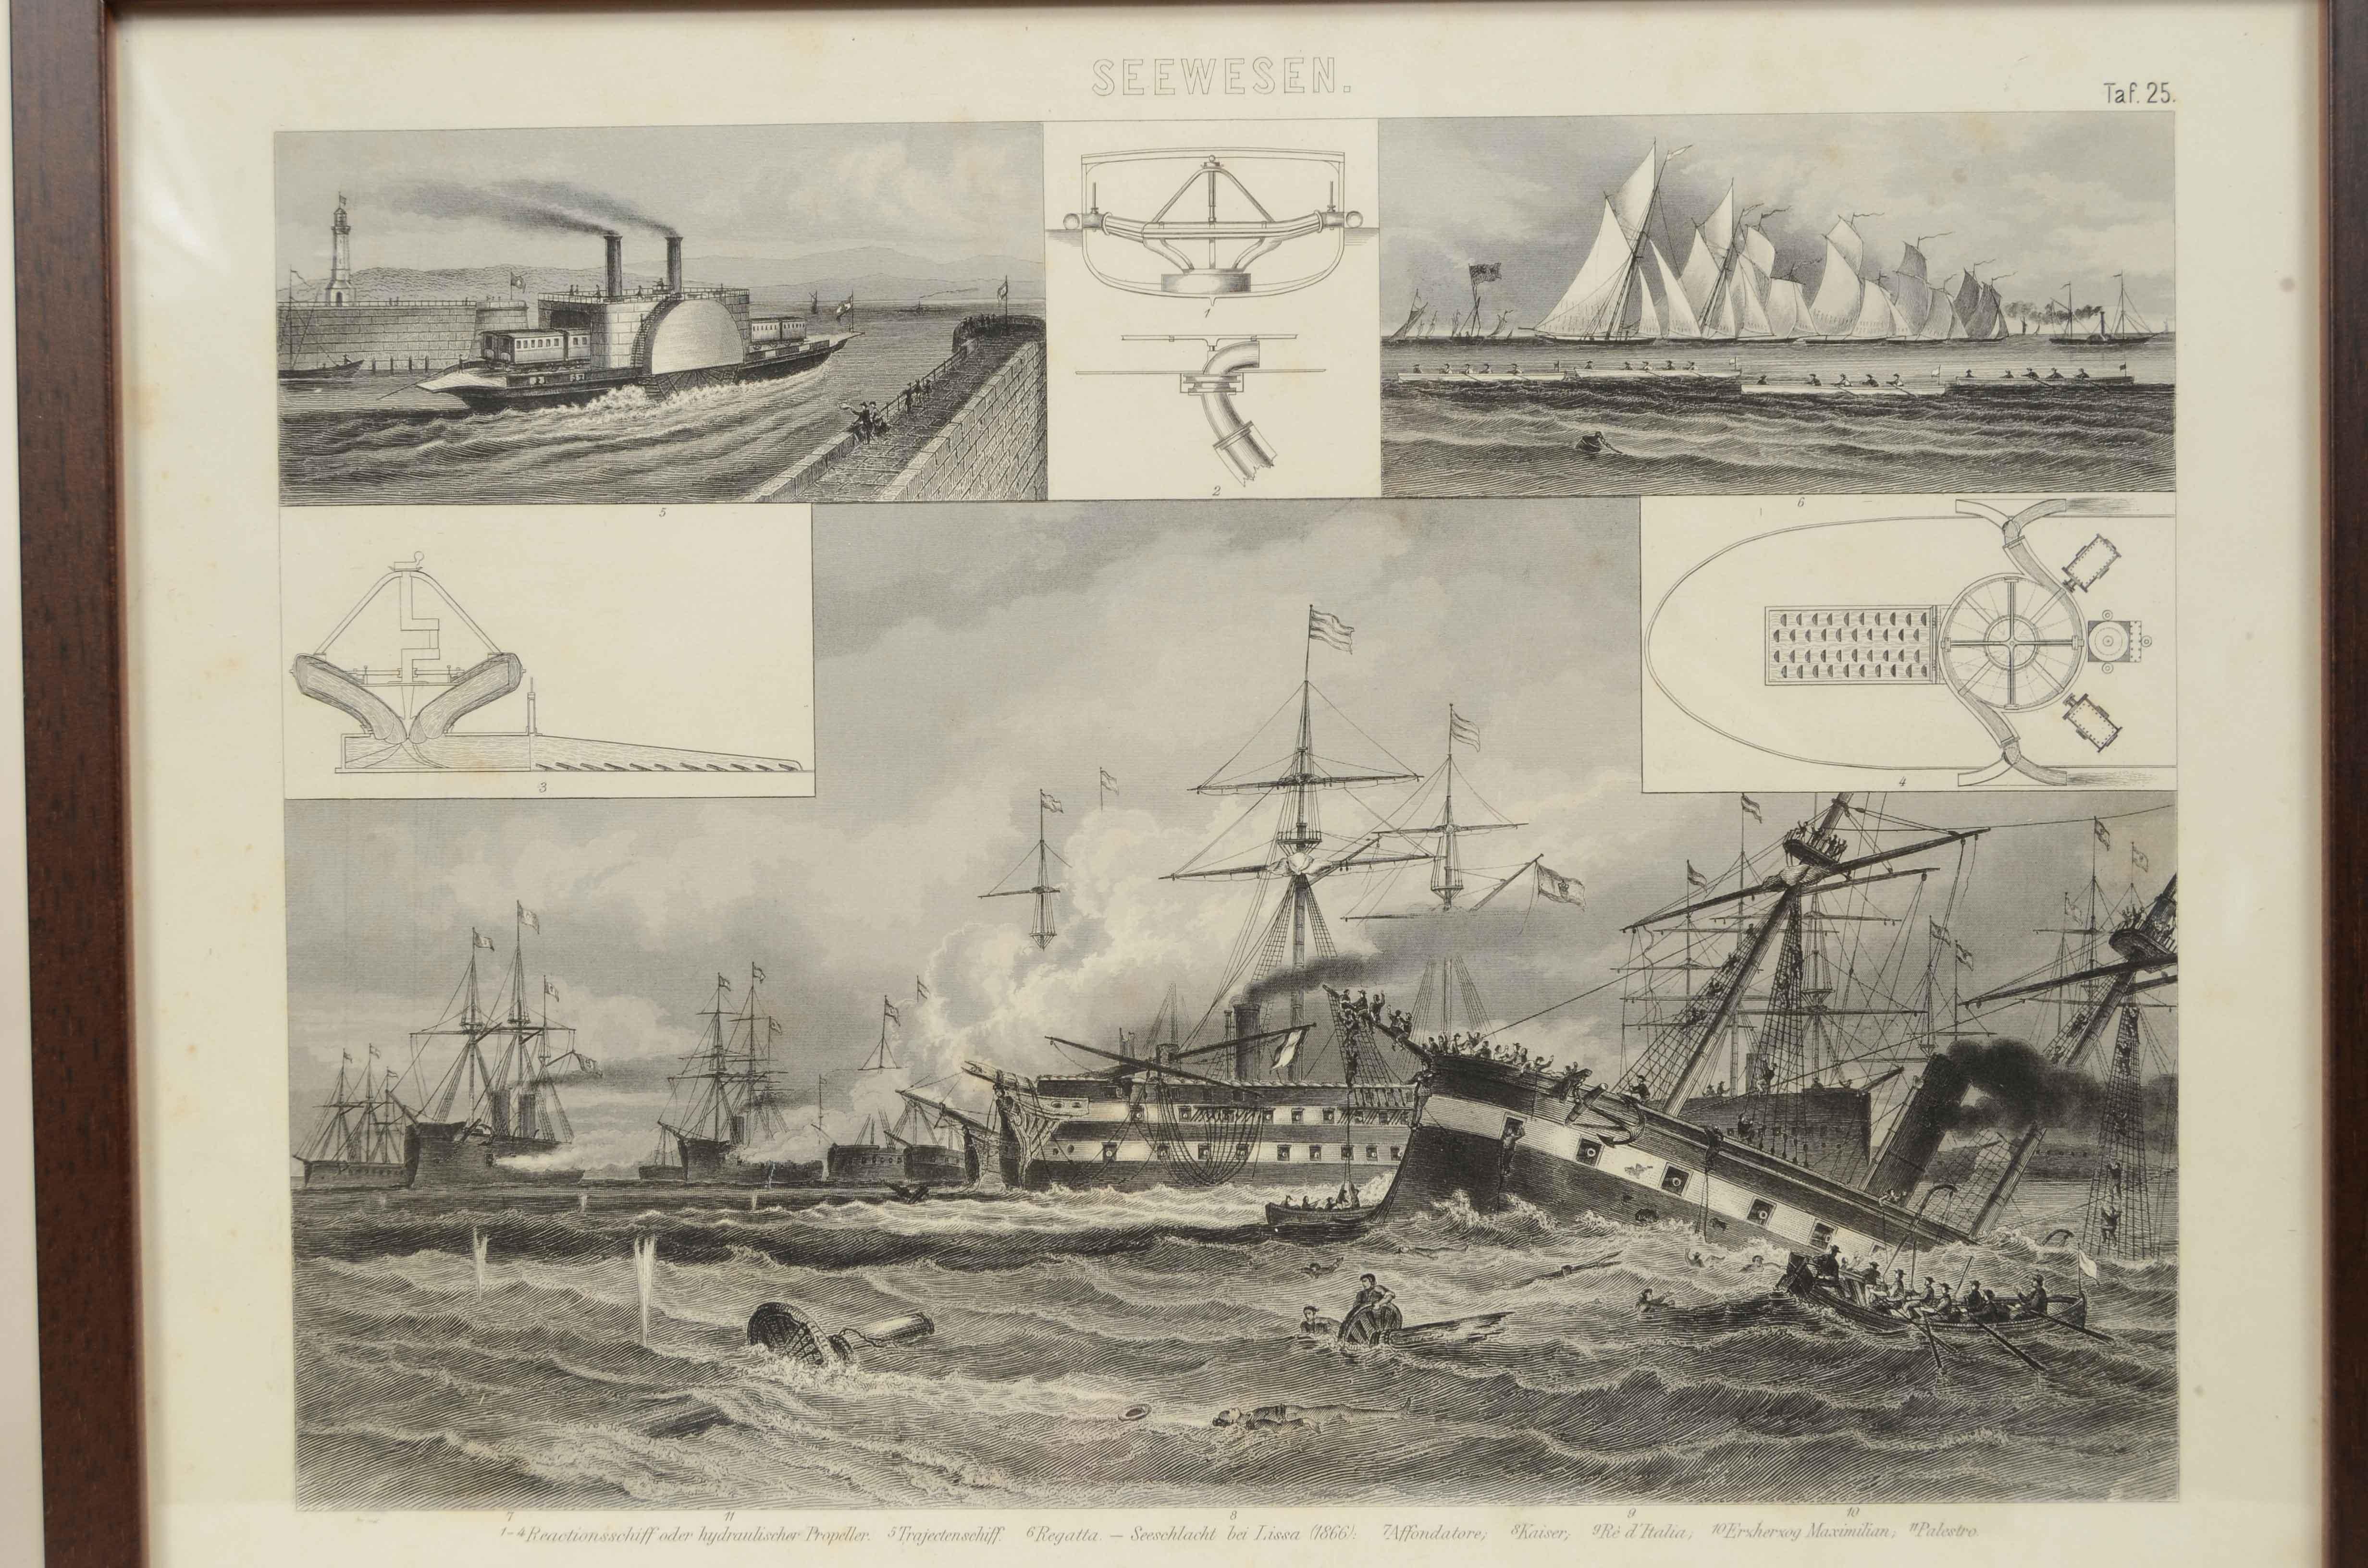 Print depicting  plate No. 25 from engraving on steel plate and taken from the Illustrated Atlas published by F.A.  Brockhaus, in Leipzig 1869-1875 the iconographic encyclopedia of the sciences and arts. This is a print pertaining to naval history